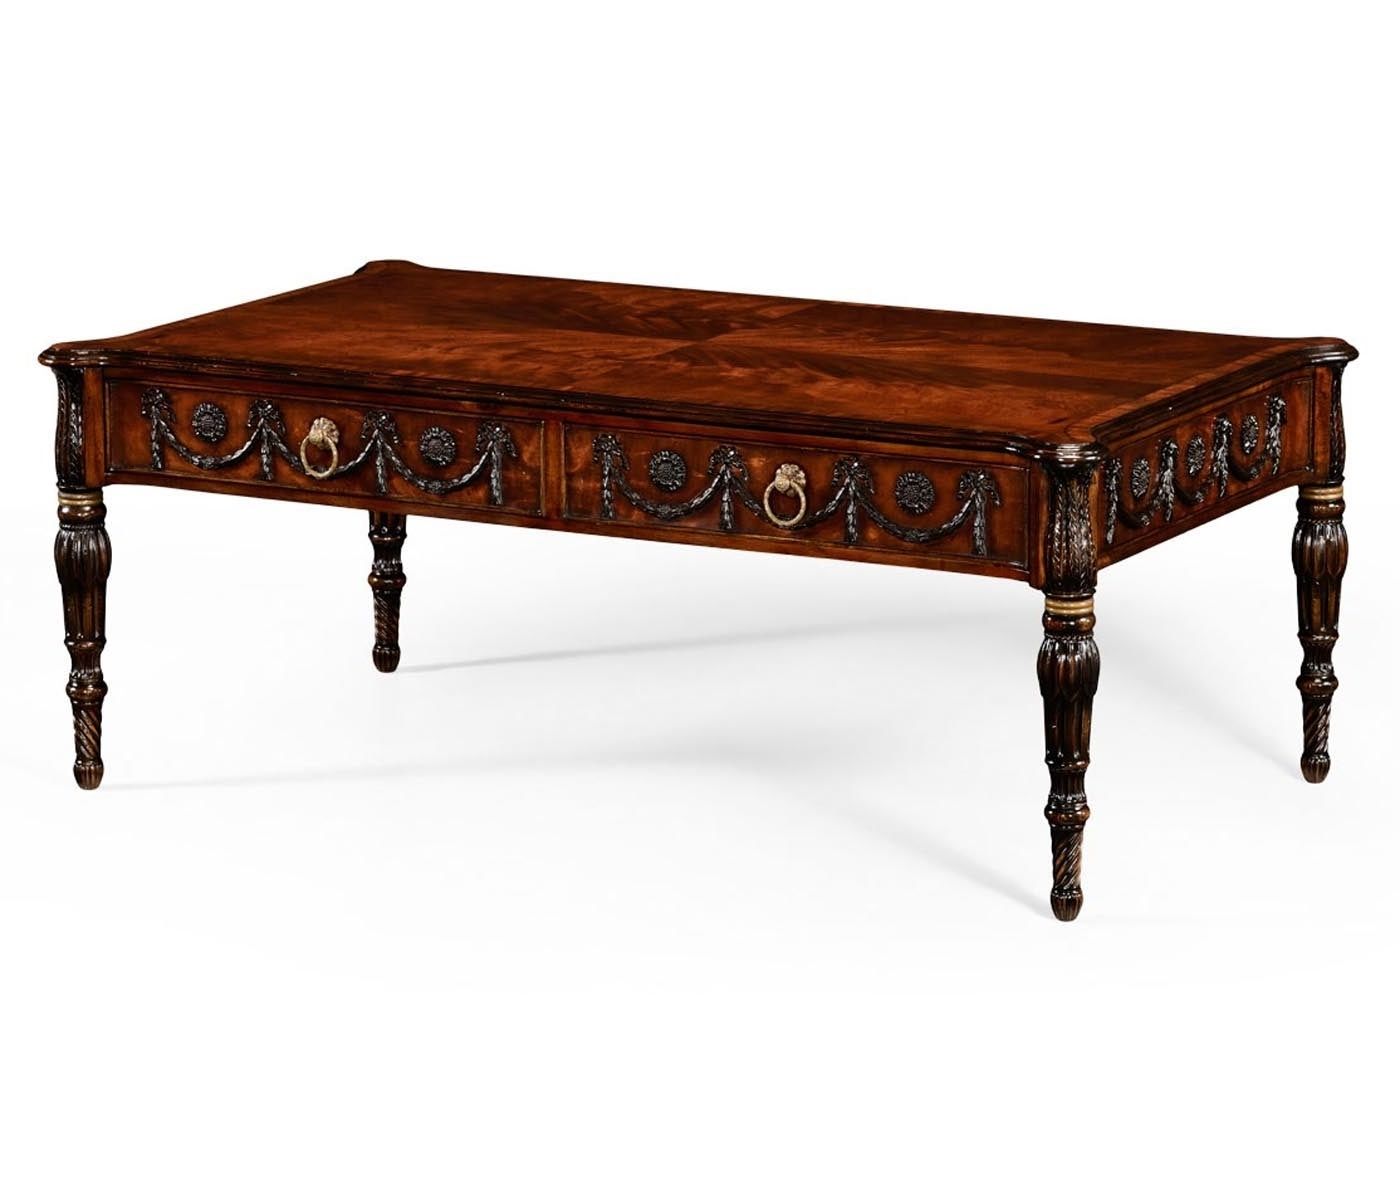 Neo Classical Adam Style Mahogany Coffee Table Inside Best And Newest Adam Coffee Tables (View 9 of 20)